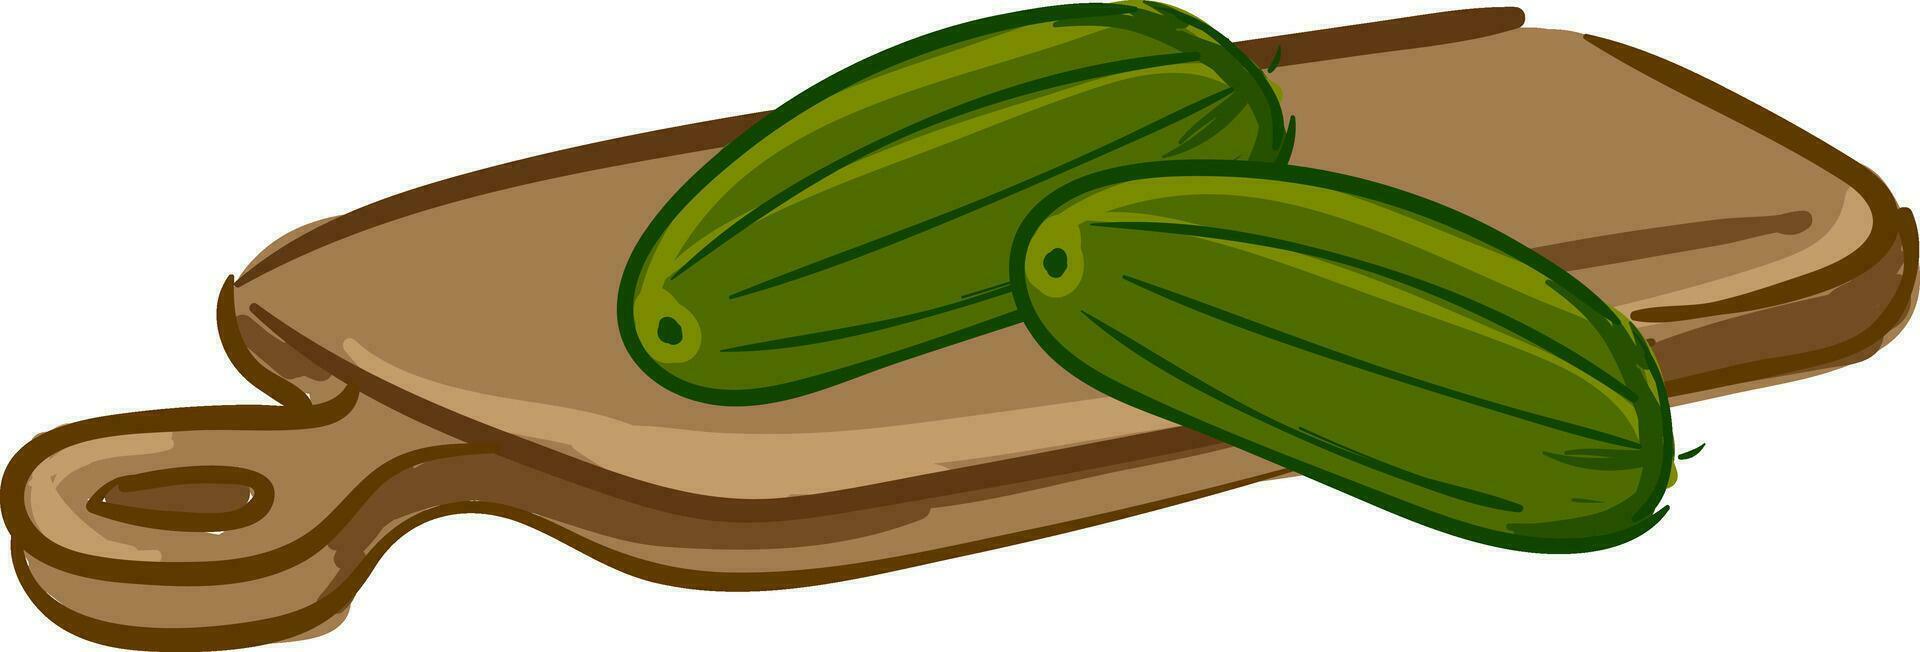 Couple of cucumbers on a chopping board vector